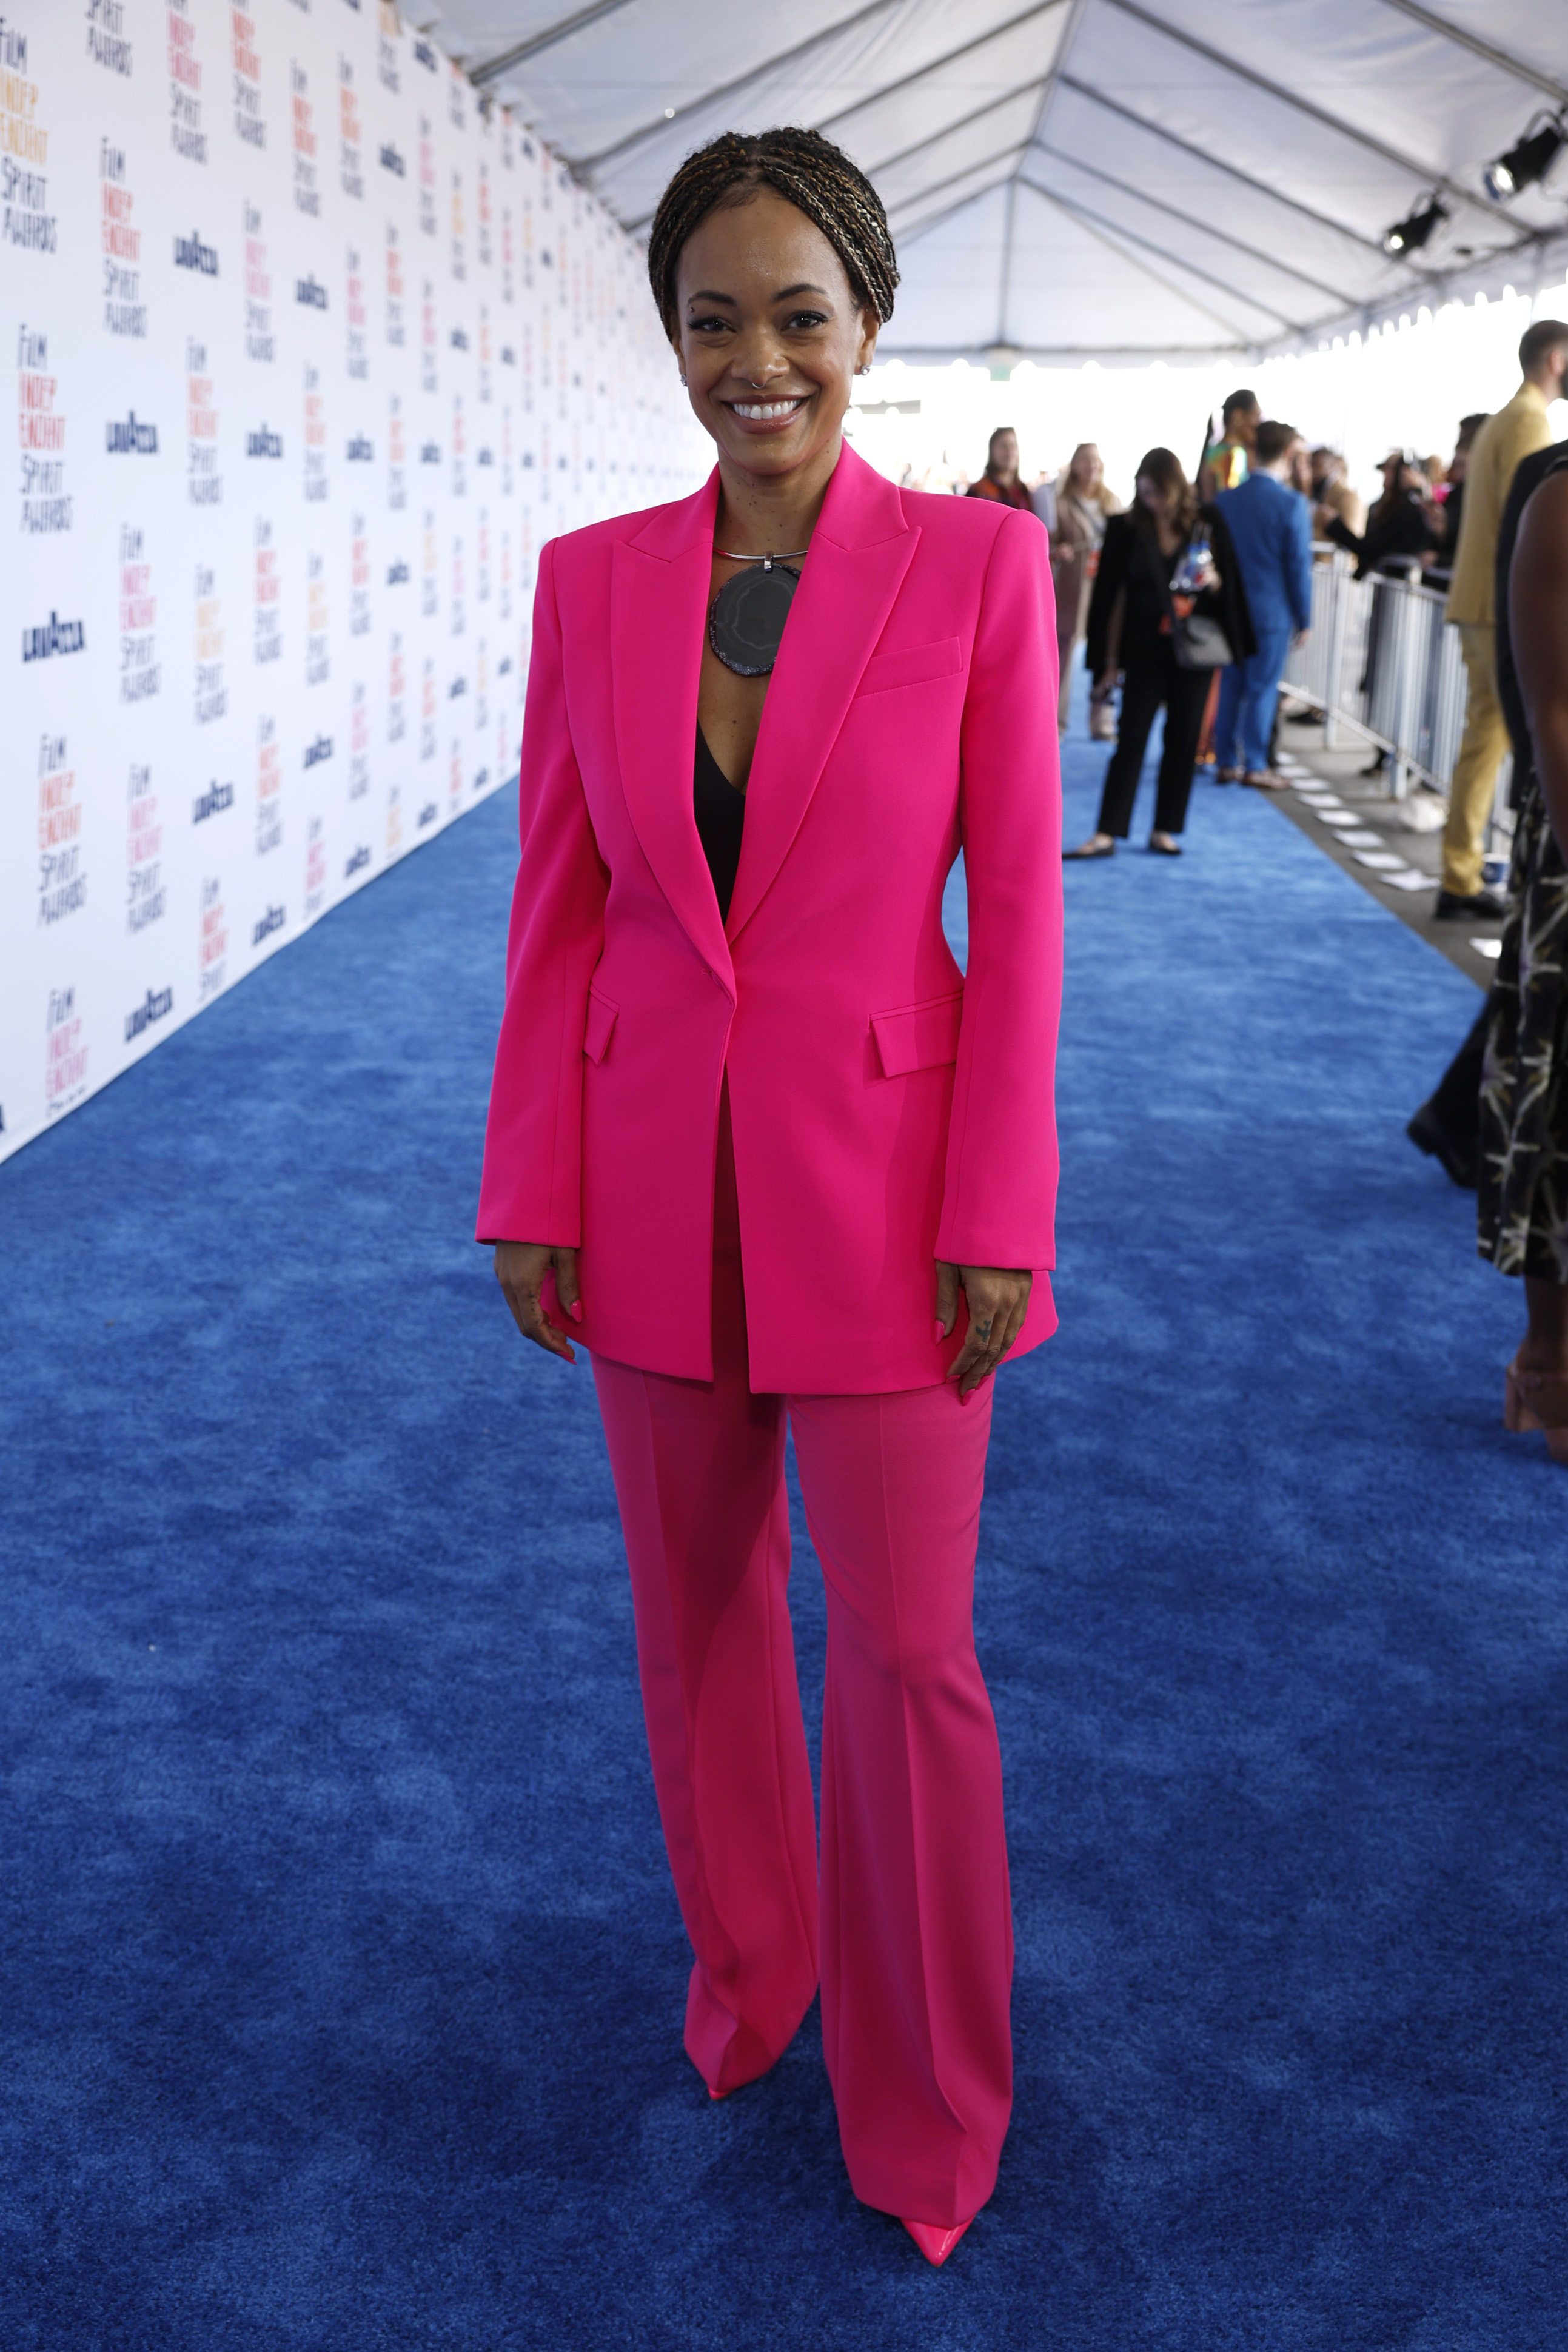 Stephanie Filo in a bright pantsuit with a top, smiling